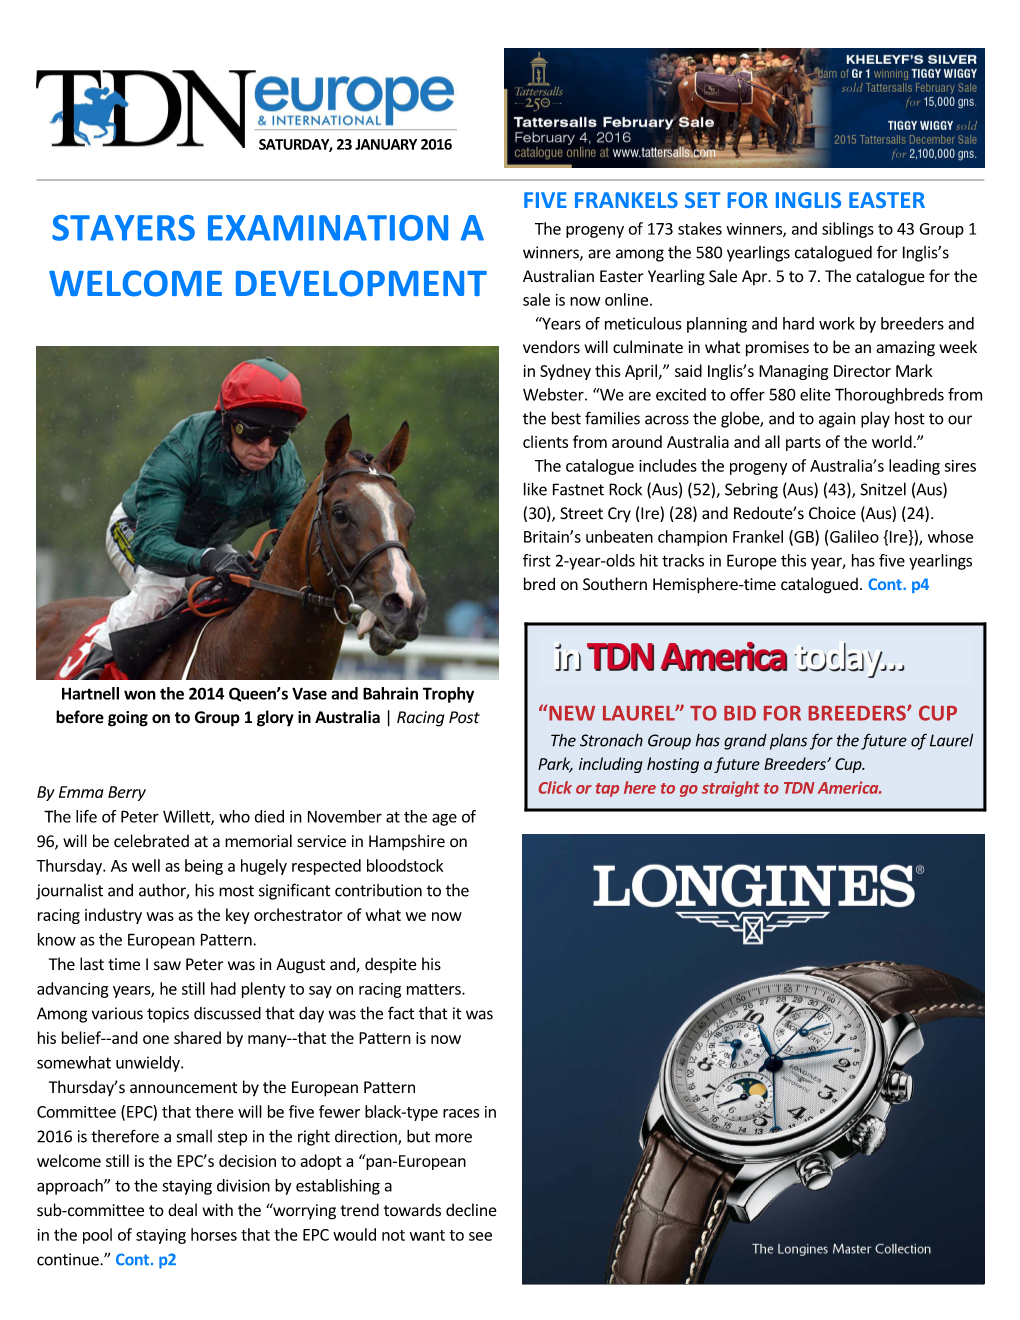 Stayers Examination a Welcome Development Cont